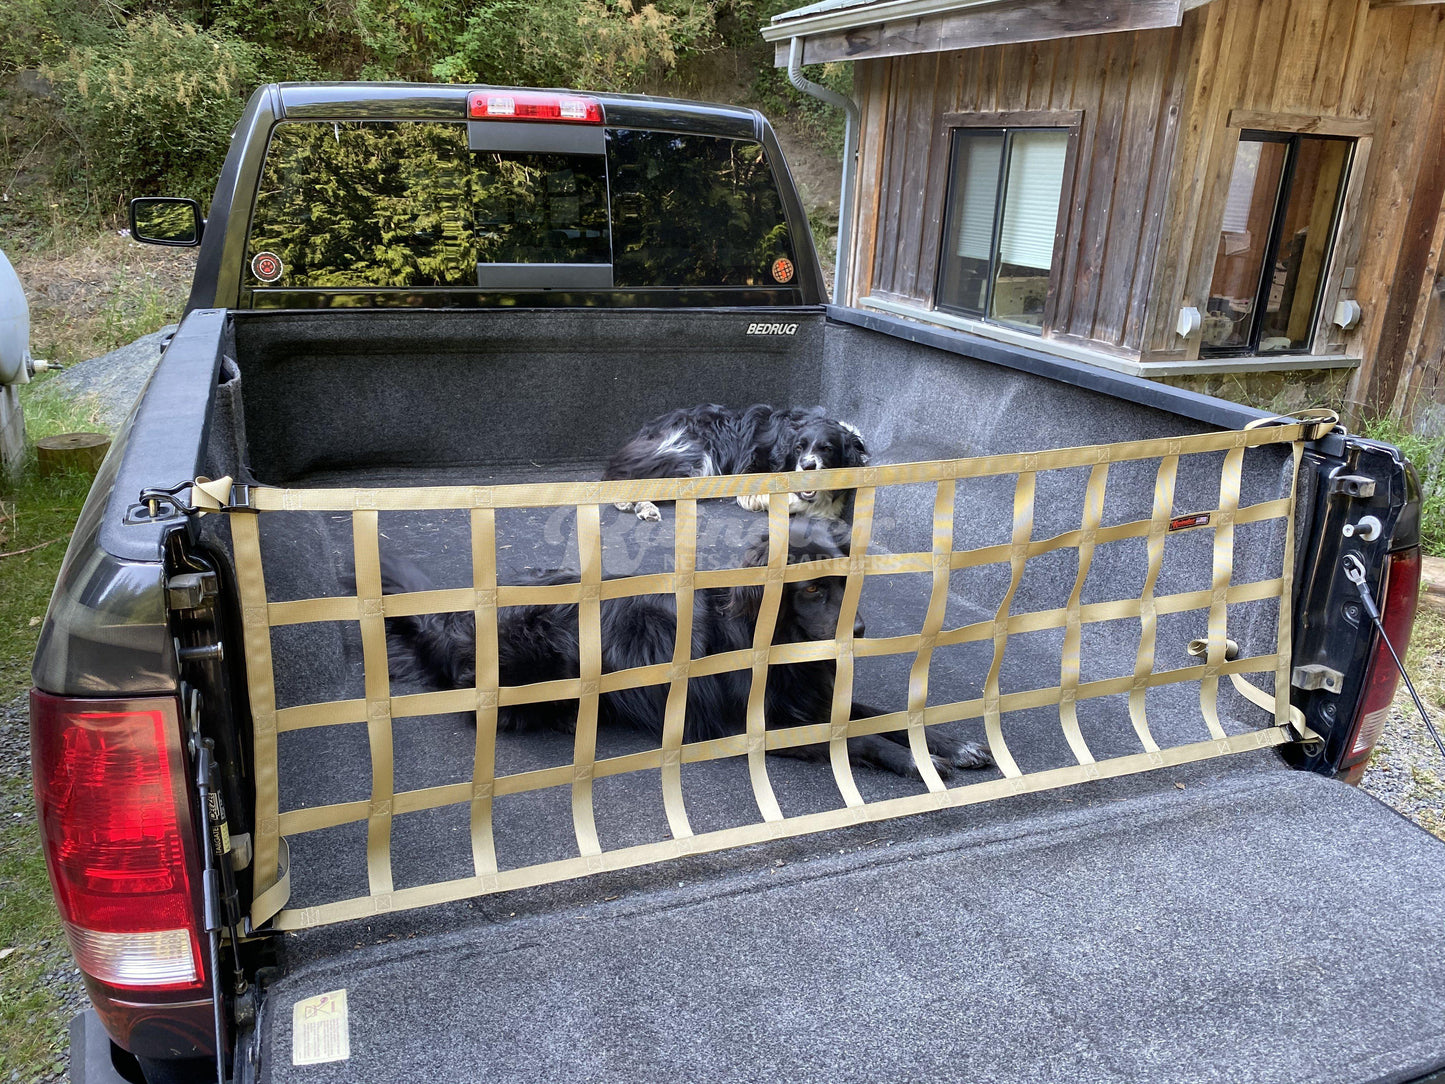 2016 - Newer Toyota Tacoma Bed Divider Net